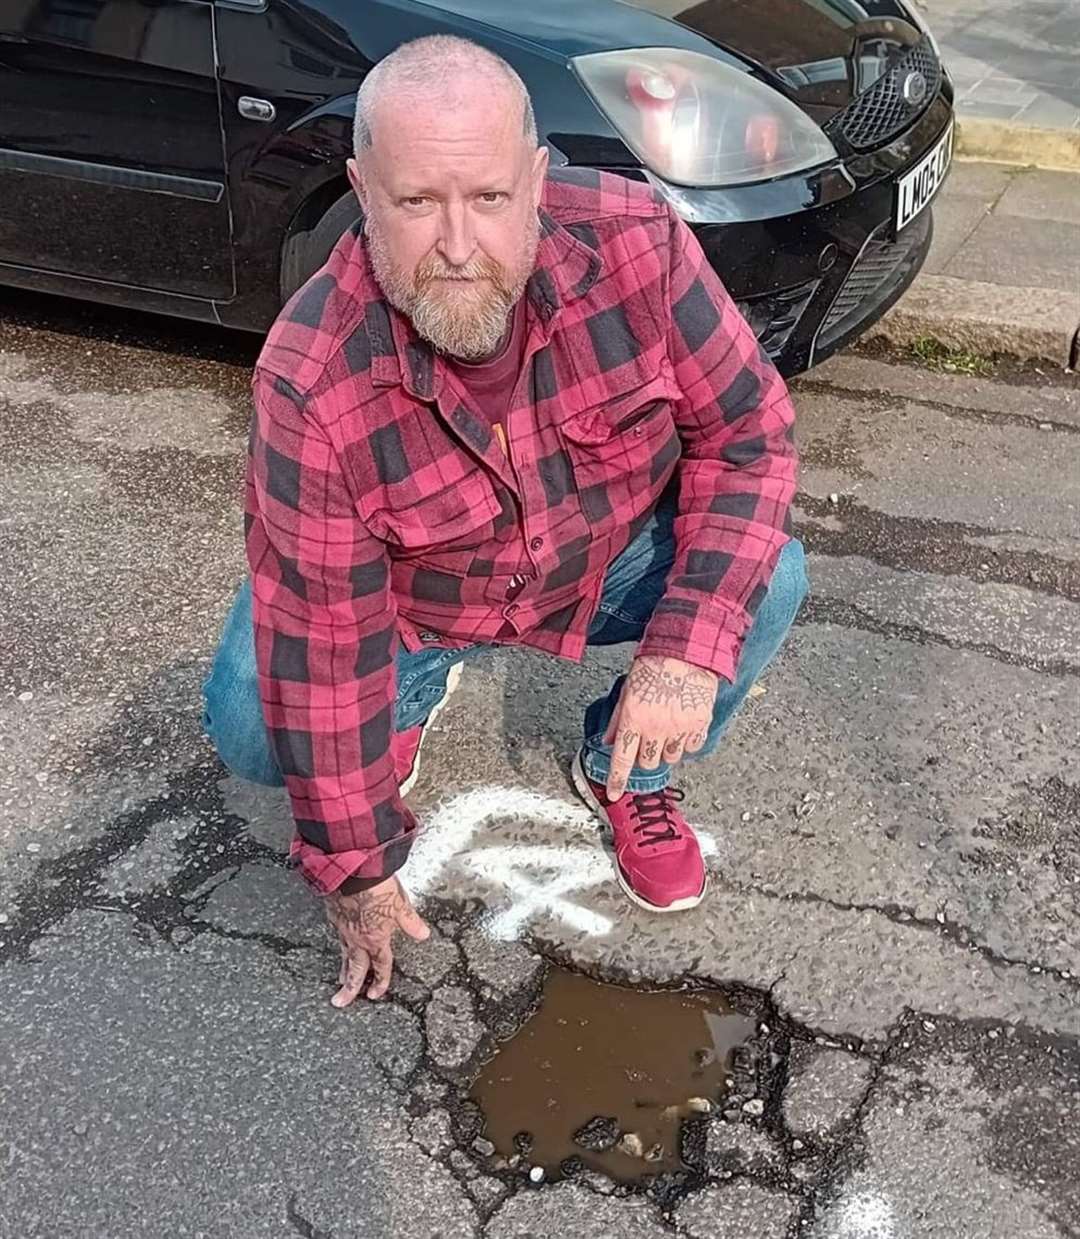 Ian Maggs planned to fill the potholes himself in Cowper Road, Sittingbourne